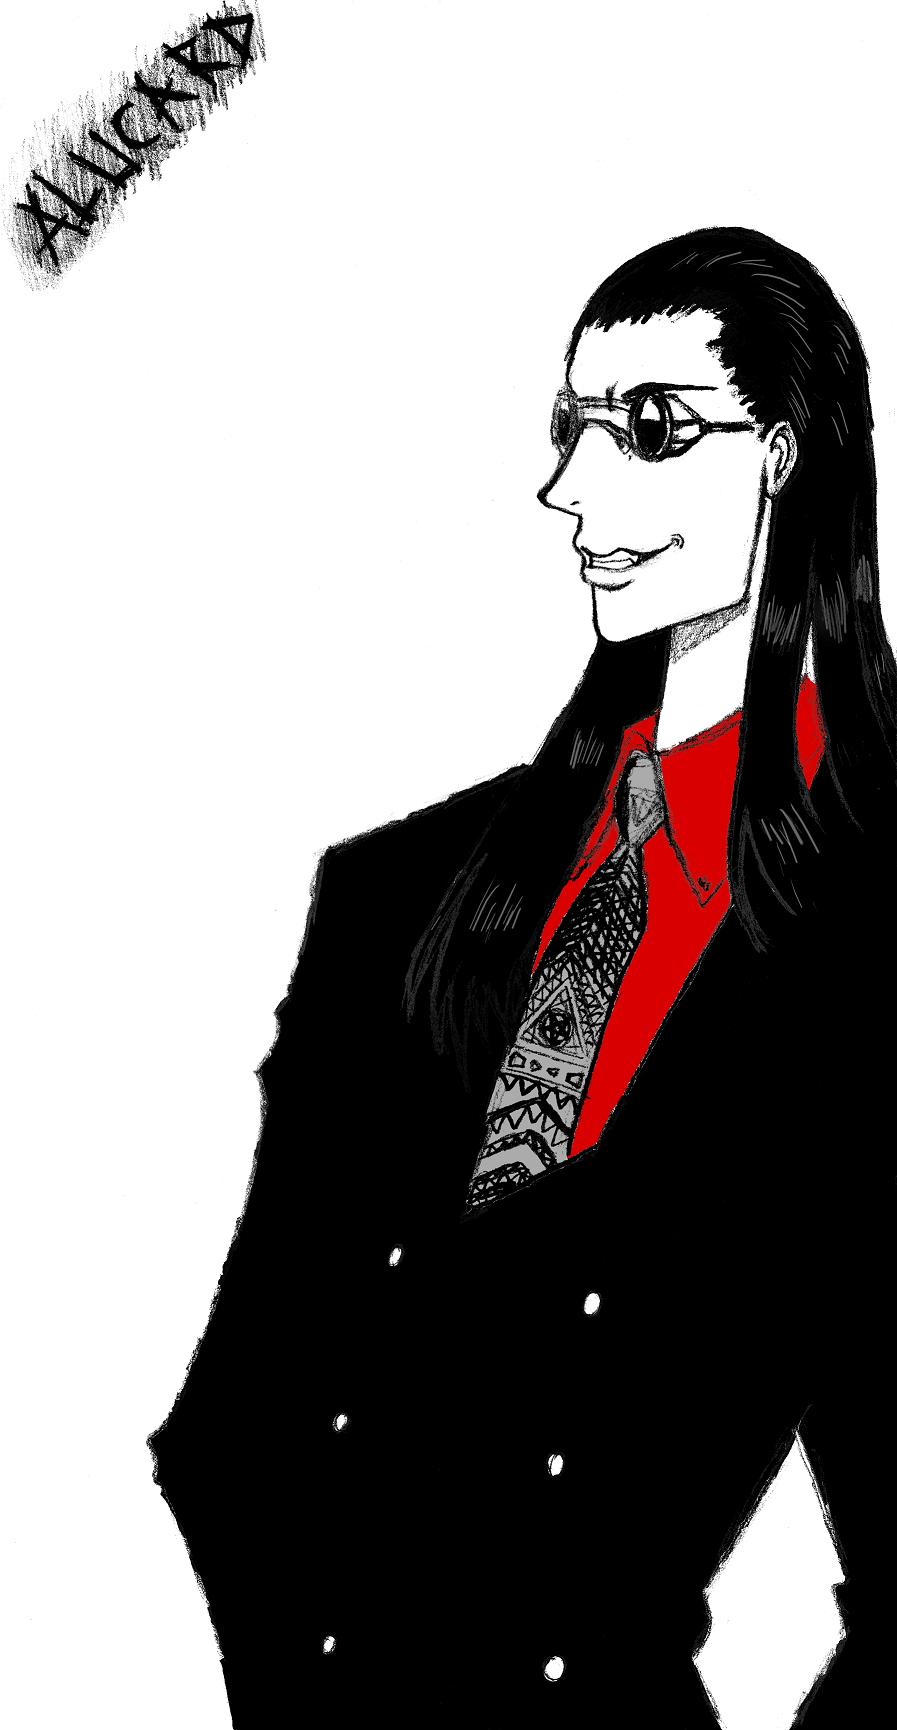 Alucard [who is mine btw, so don't get any ideas!] by DarkFaerie